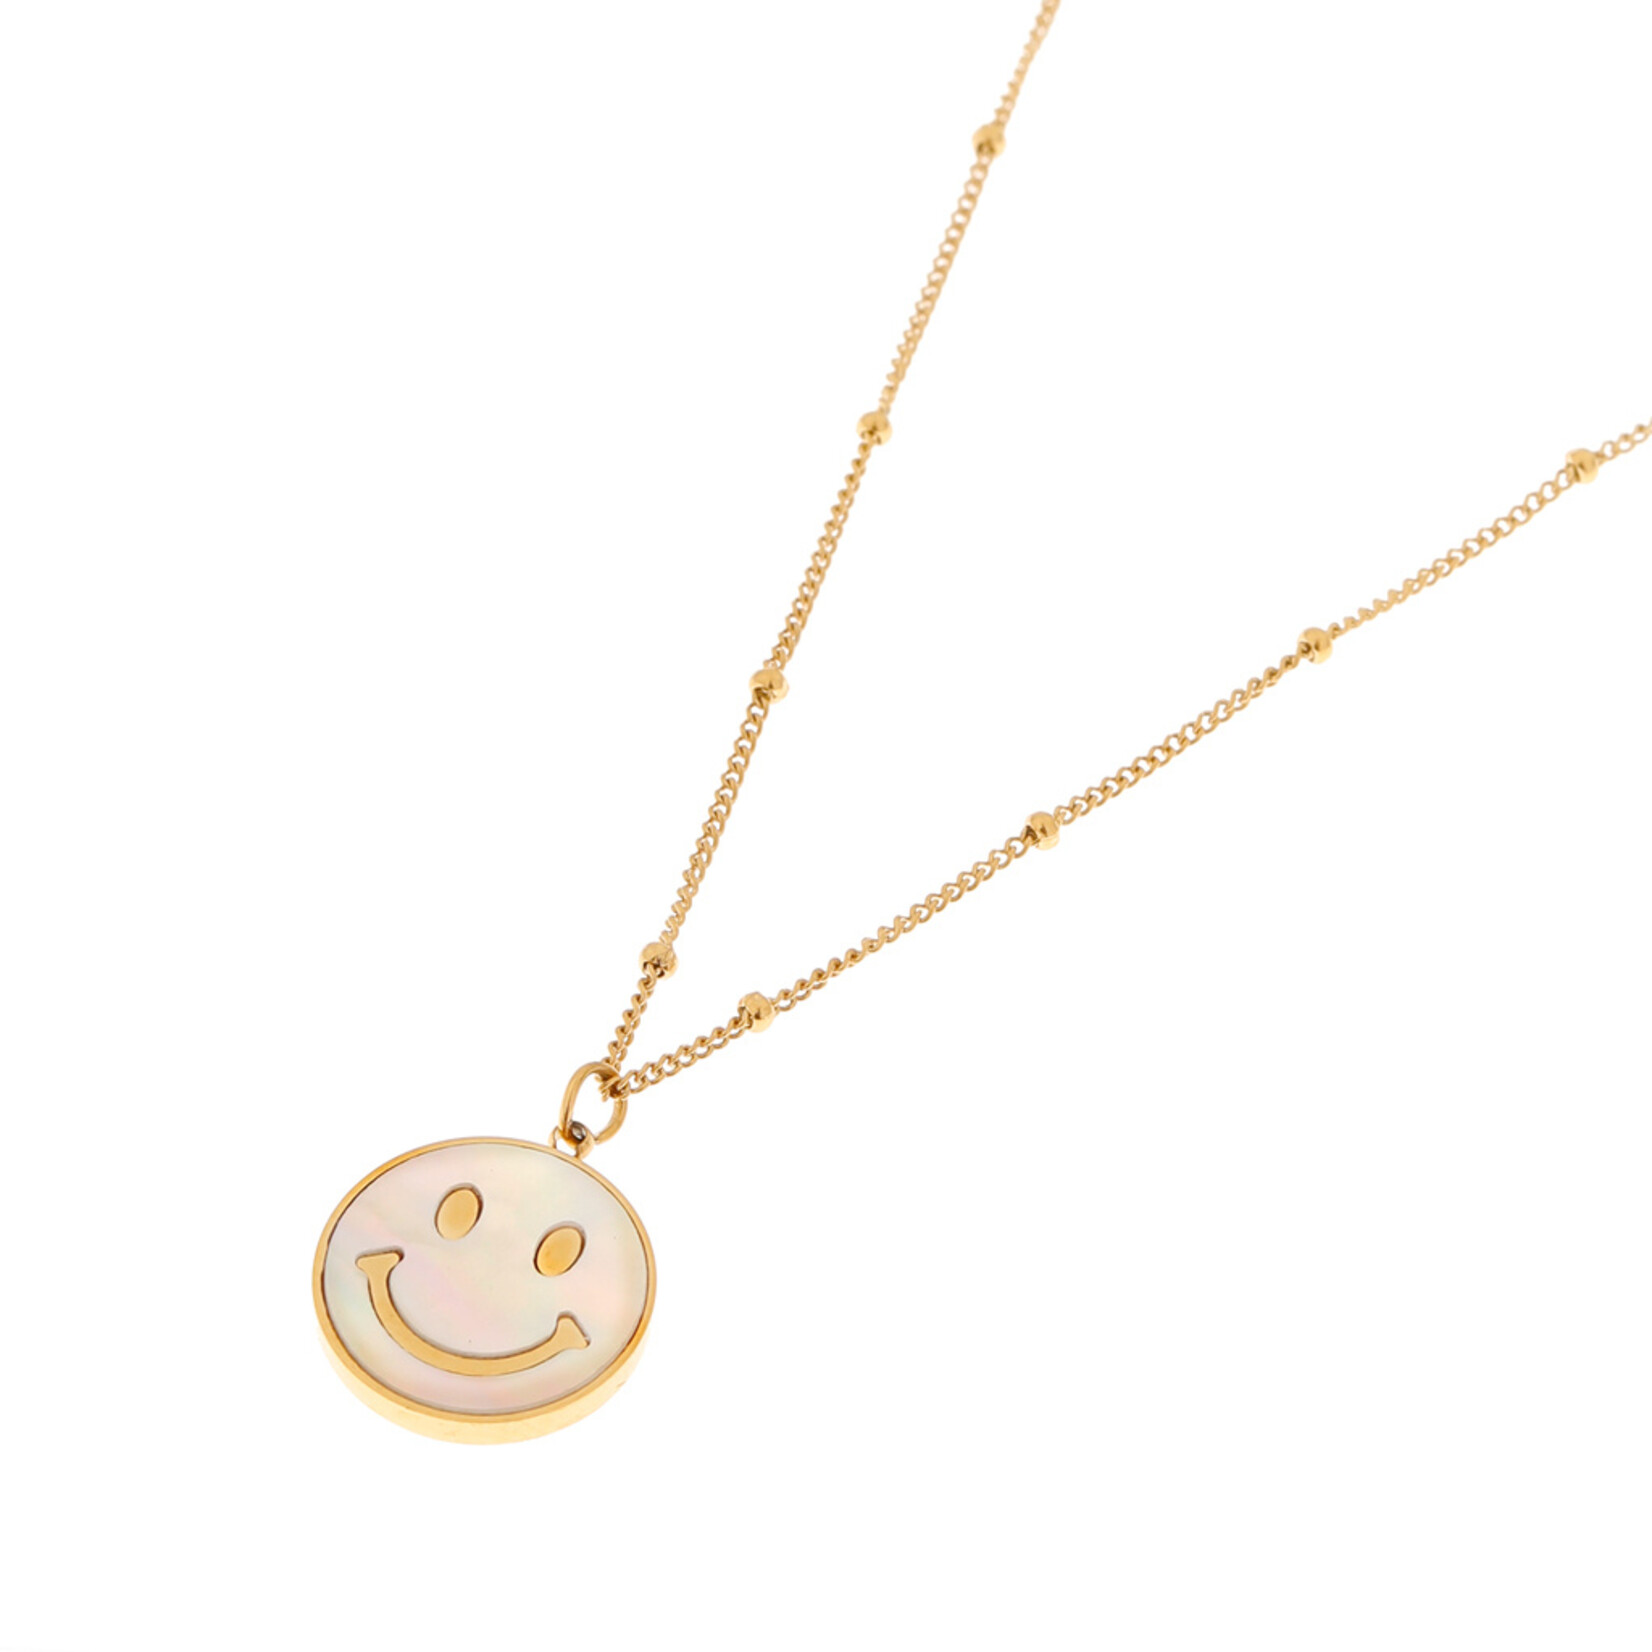 Shiny Smiley Necklace Gold